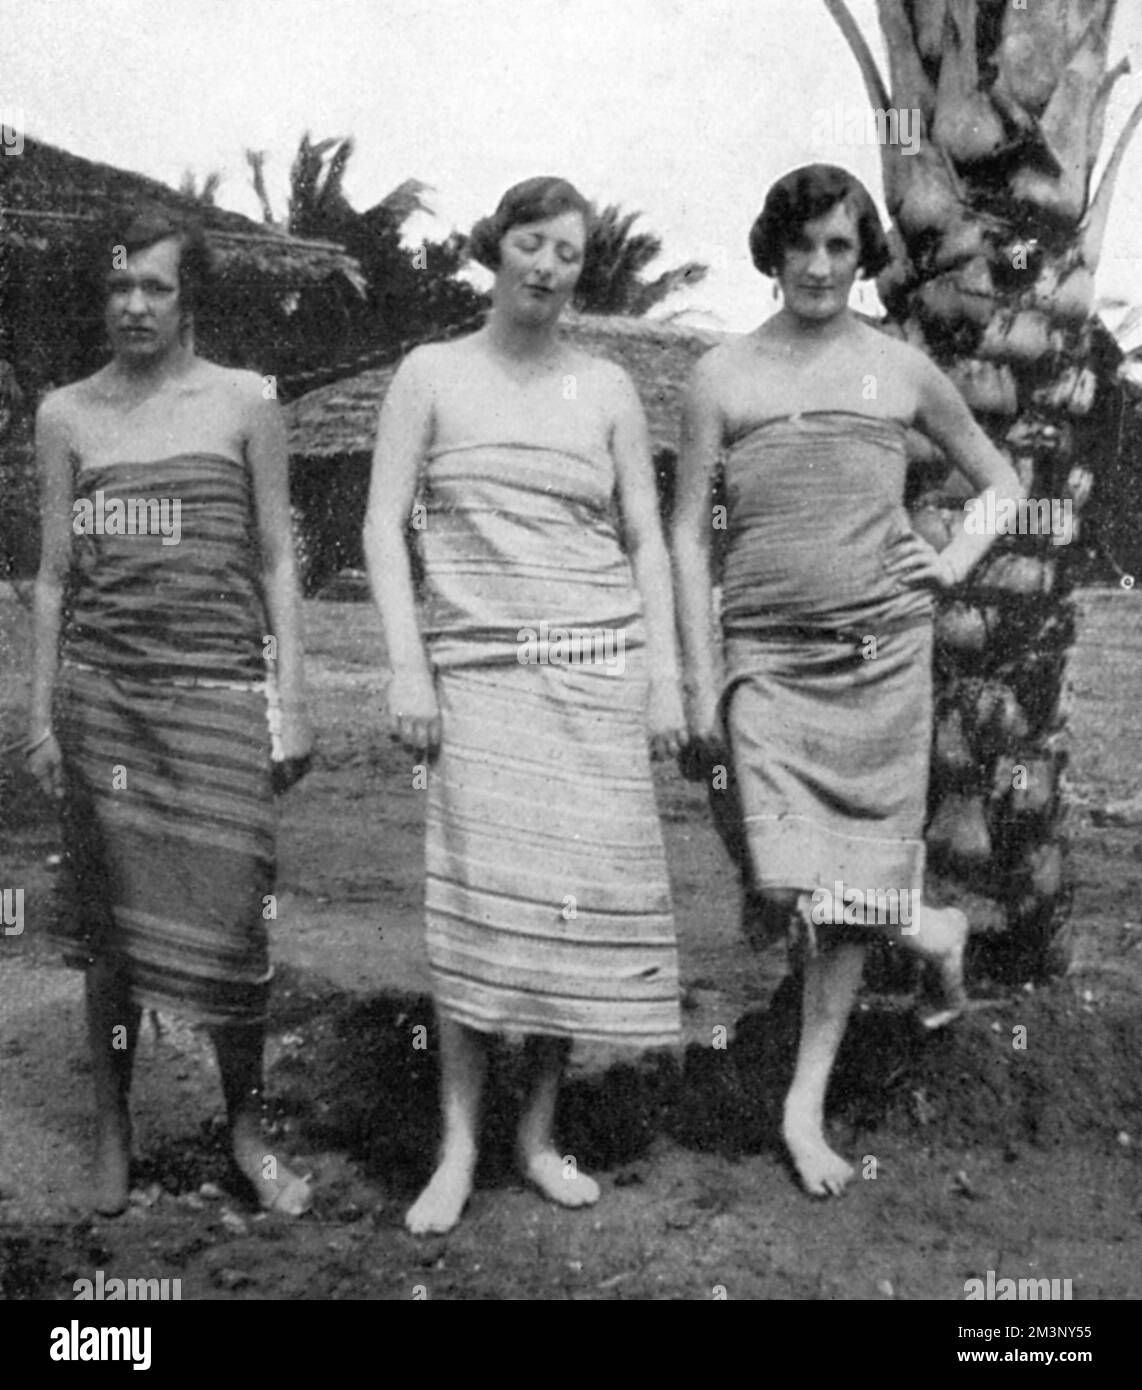 Lady Idina Hay (nee Sackville), pictured in a sarong or kanga with two friends in Kenya during the 1920s, while she was married to Josslyn Hay, Earl of Erroll.  On the left is the Countess N. de Graevenitz and on the right, Mrs. M. Roberts, both similarly attired.  Five-times married Idina would gain notoriety as part of the Happy Valley Set when she moved to Kenya in 1924 with her third husband, Josslyn Hay, Earl of Errol. With her serial marriages and reputation for debauched decadence, she inspired the character of 'The Bolter' in Nancy Mitford's novels, The Pursuit of Love and Love in a Co Stock Photo